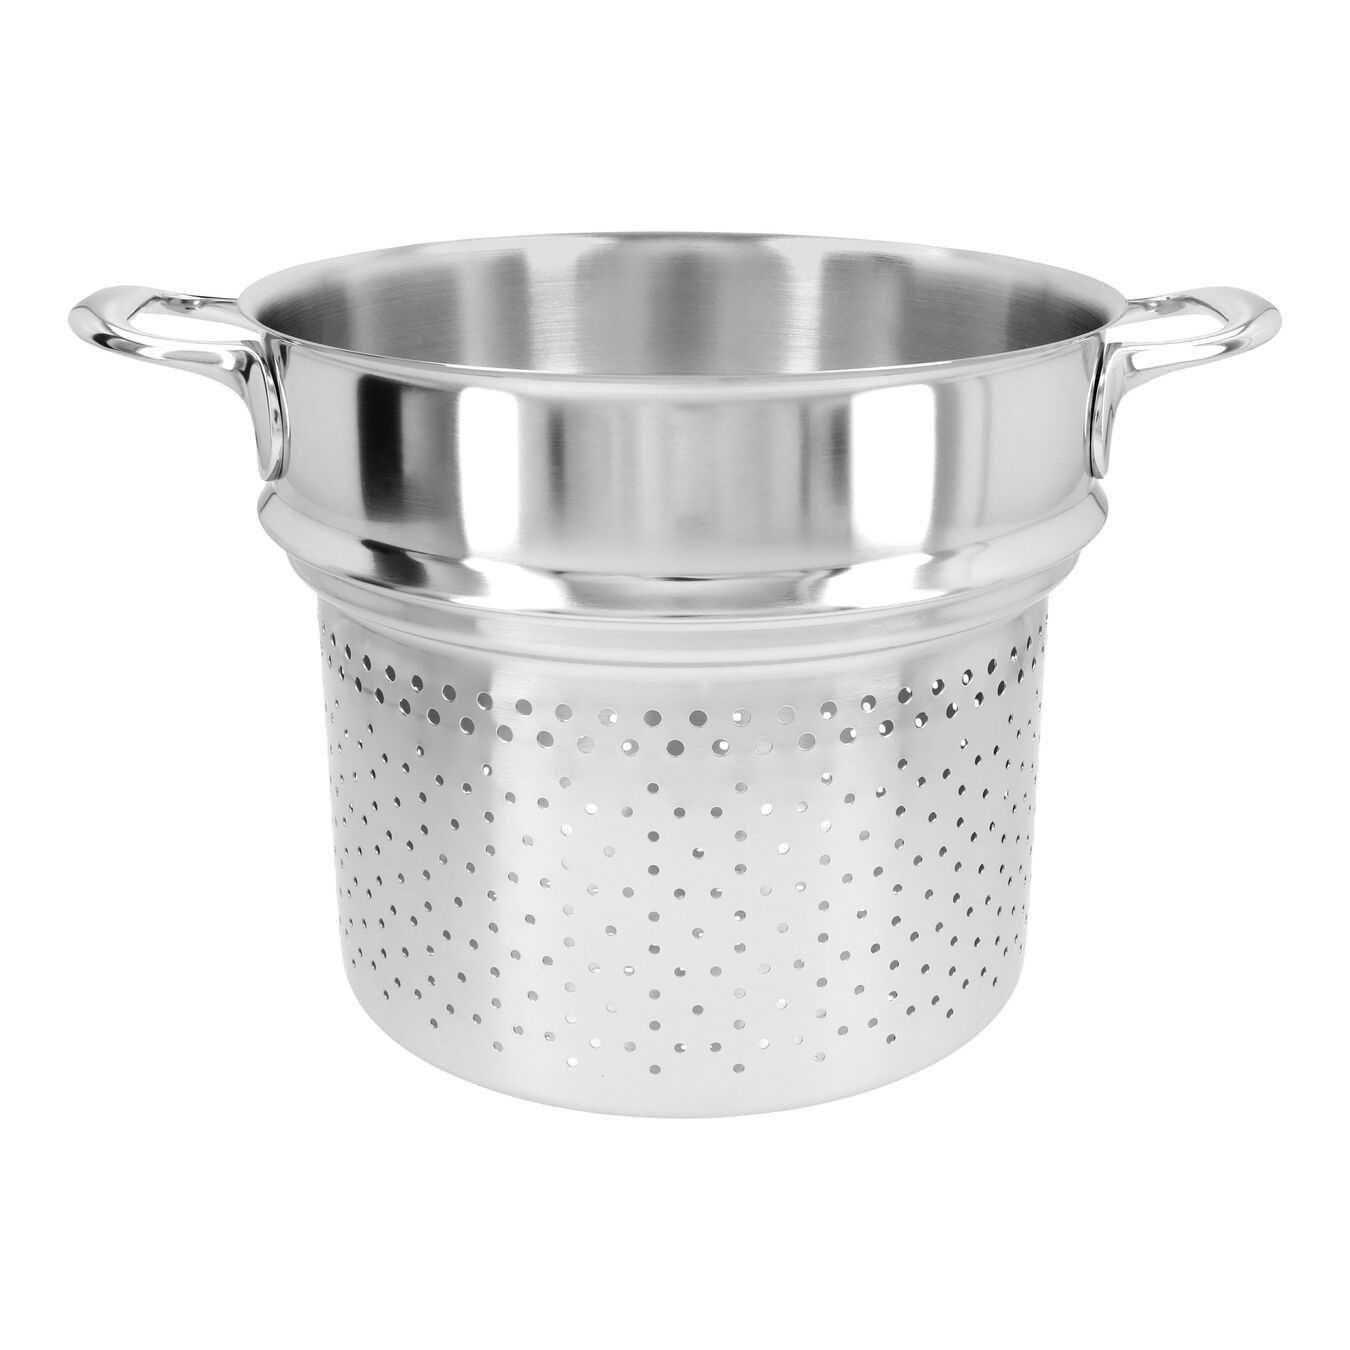 8.5 qt Pasta insert, 18/10 Stainless Steel ,,large 1